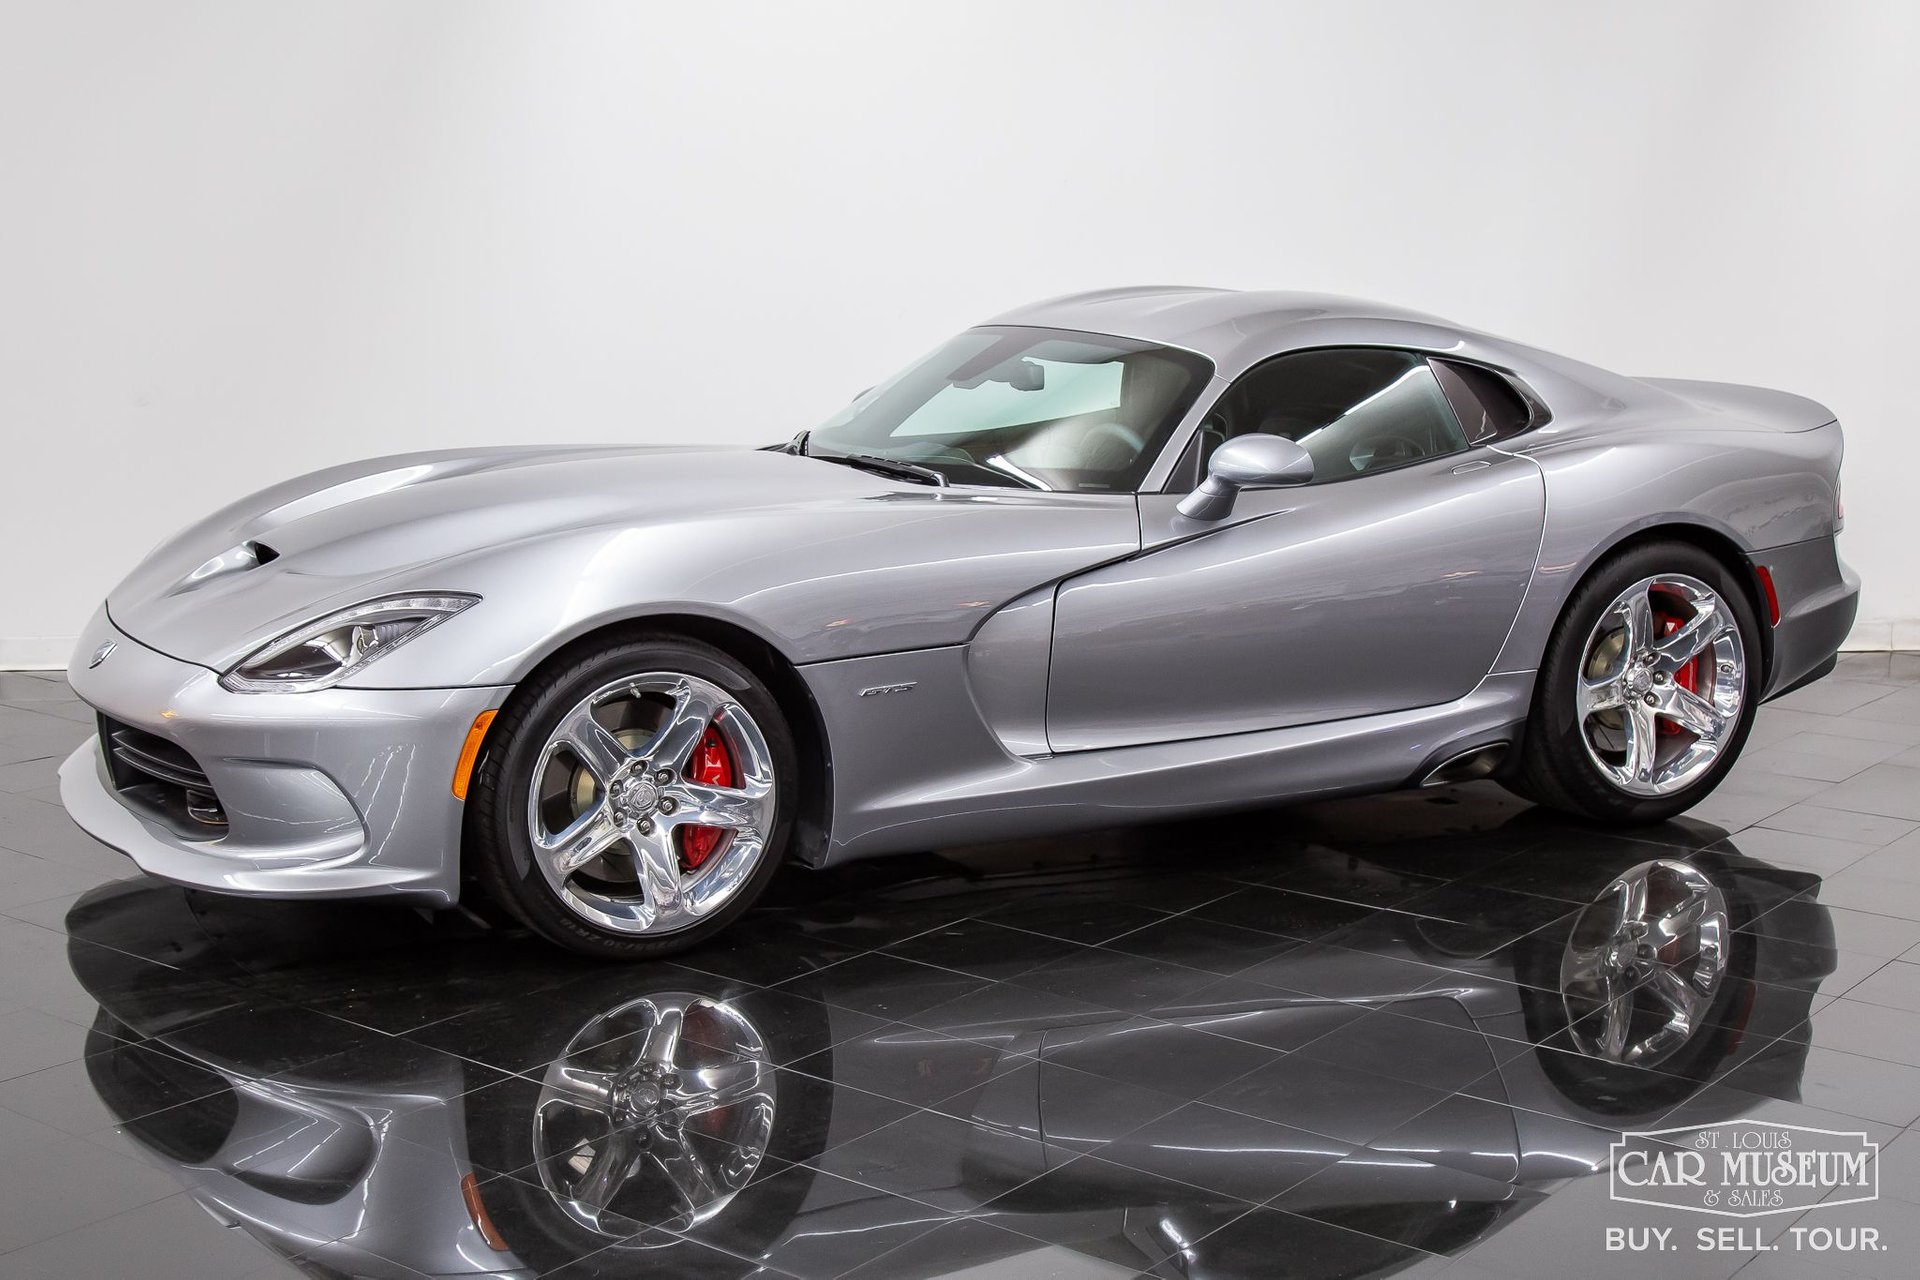 One of the last Dodge Vipers ever is up for sale